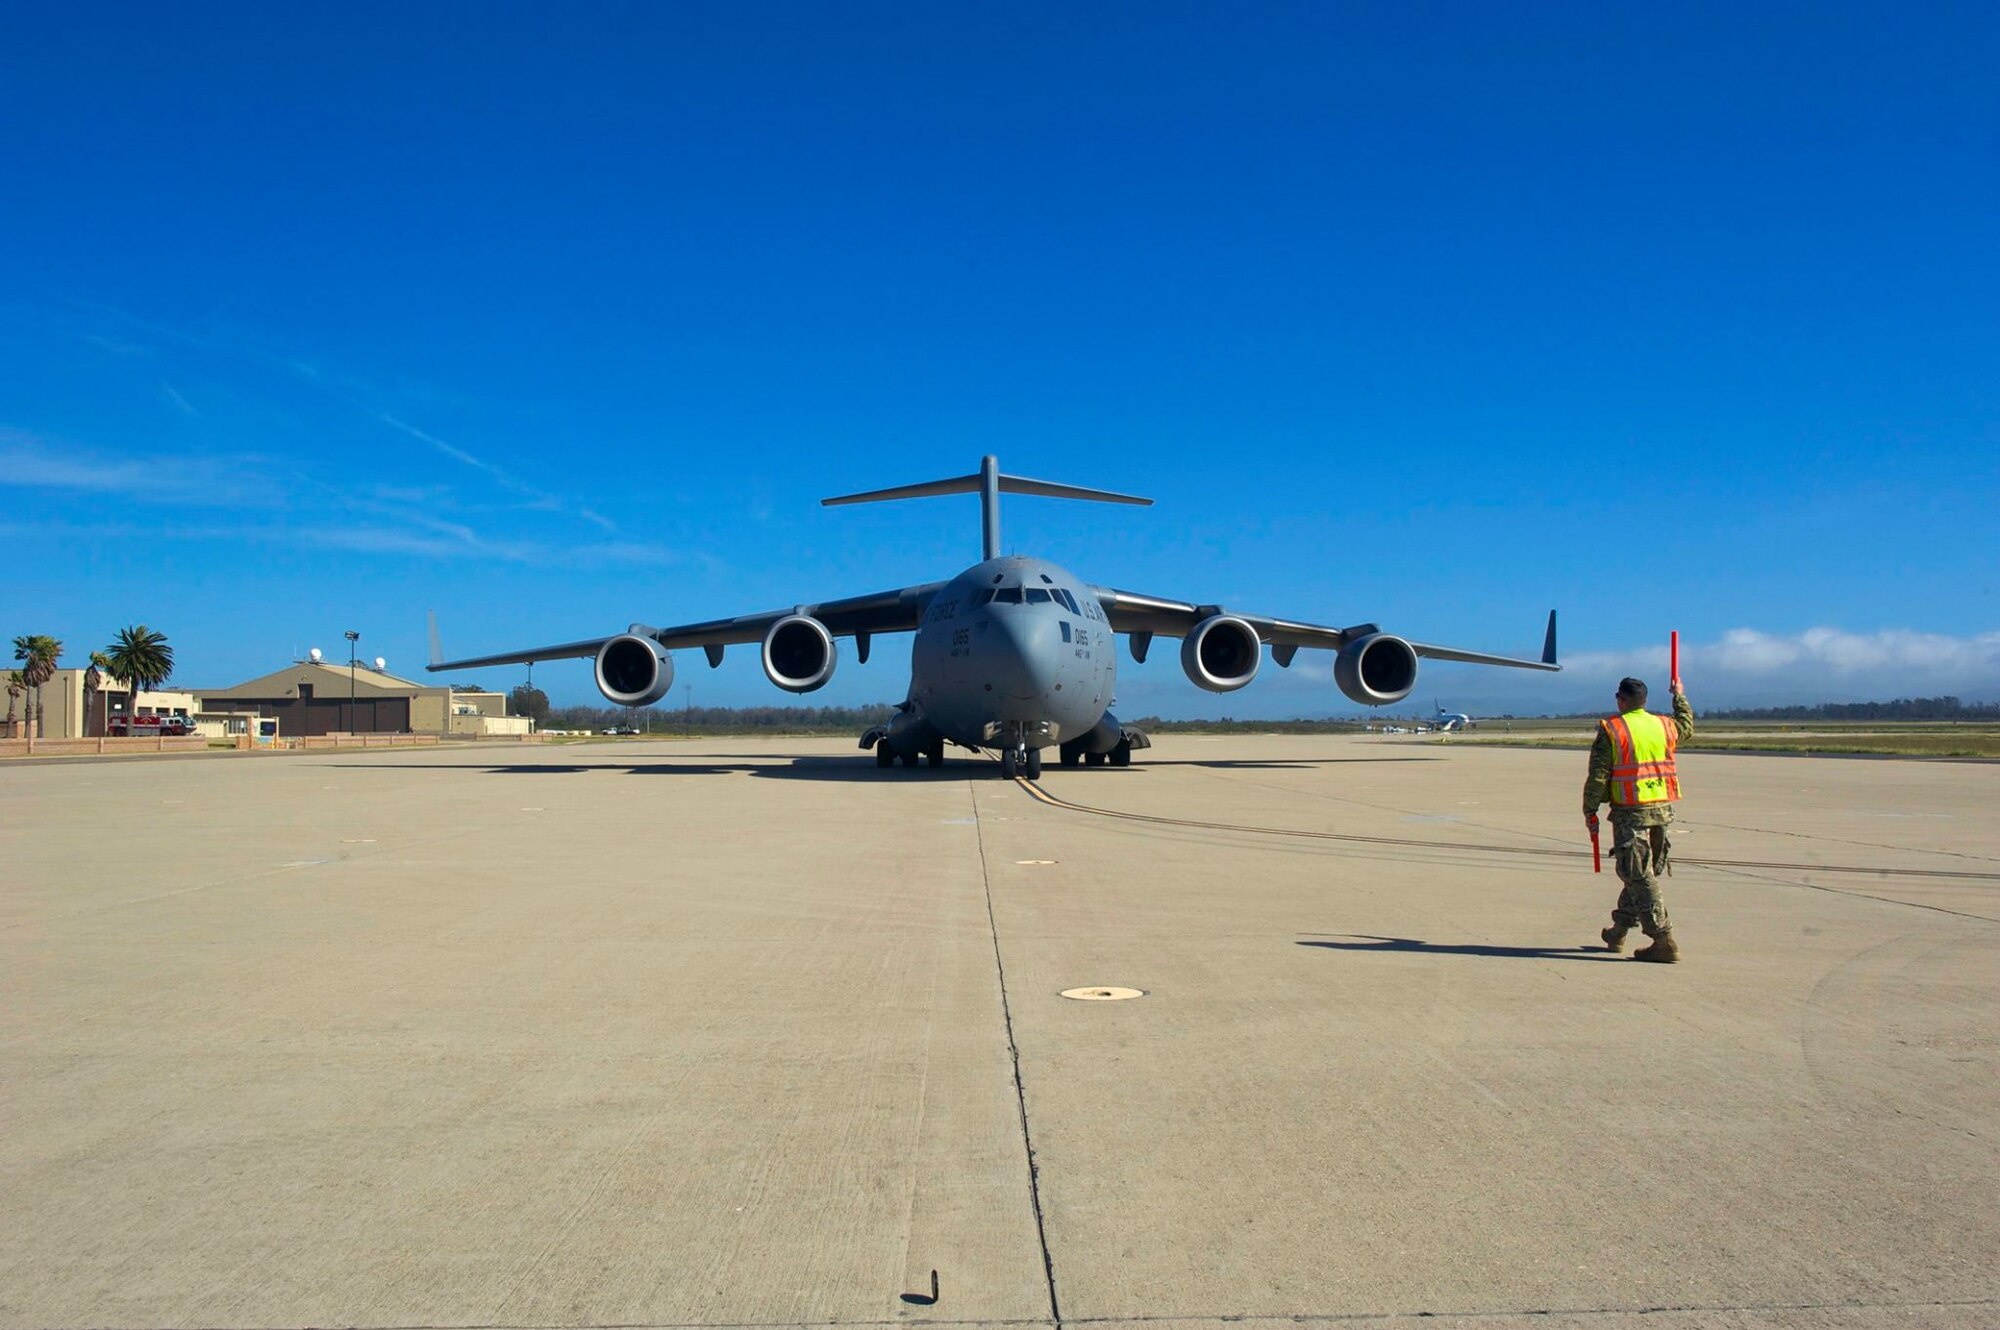 Master Sgt. Thomas Rowland, 439th Contingency Response Flight loadmaster, guides a C-17 Globemaster III, during a the Patriot Hook 2019 exercise, April 12, 2019 at Vandenberg Air Force Base, Calif. This particular air mobility exercise focused on the ability to rapidly deploy troops and cargo in the event of a humanitarian crisis. (U.S. Air Force photo by Staff Sgt. Shane Phipps)